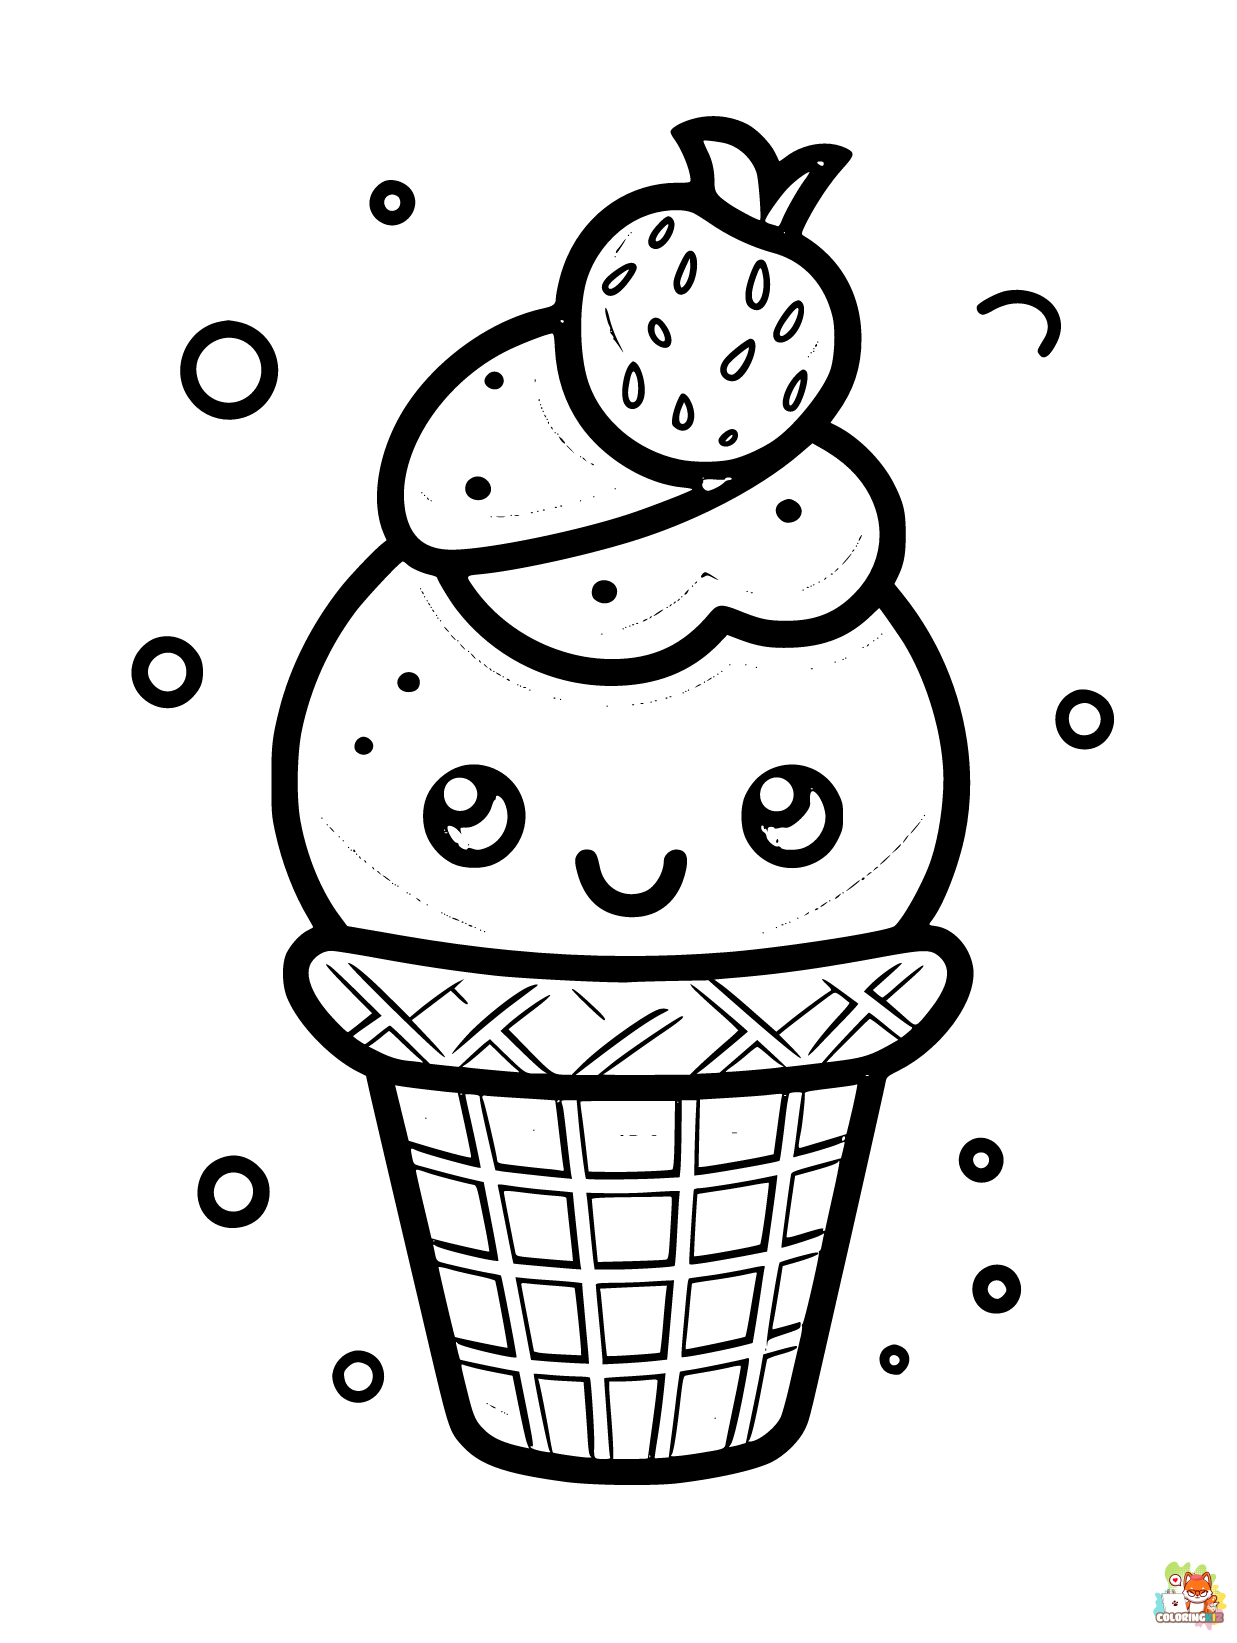 Free Ice Cream Coloring Pages